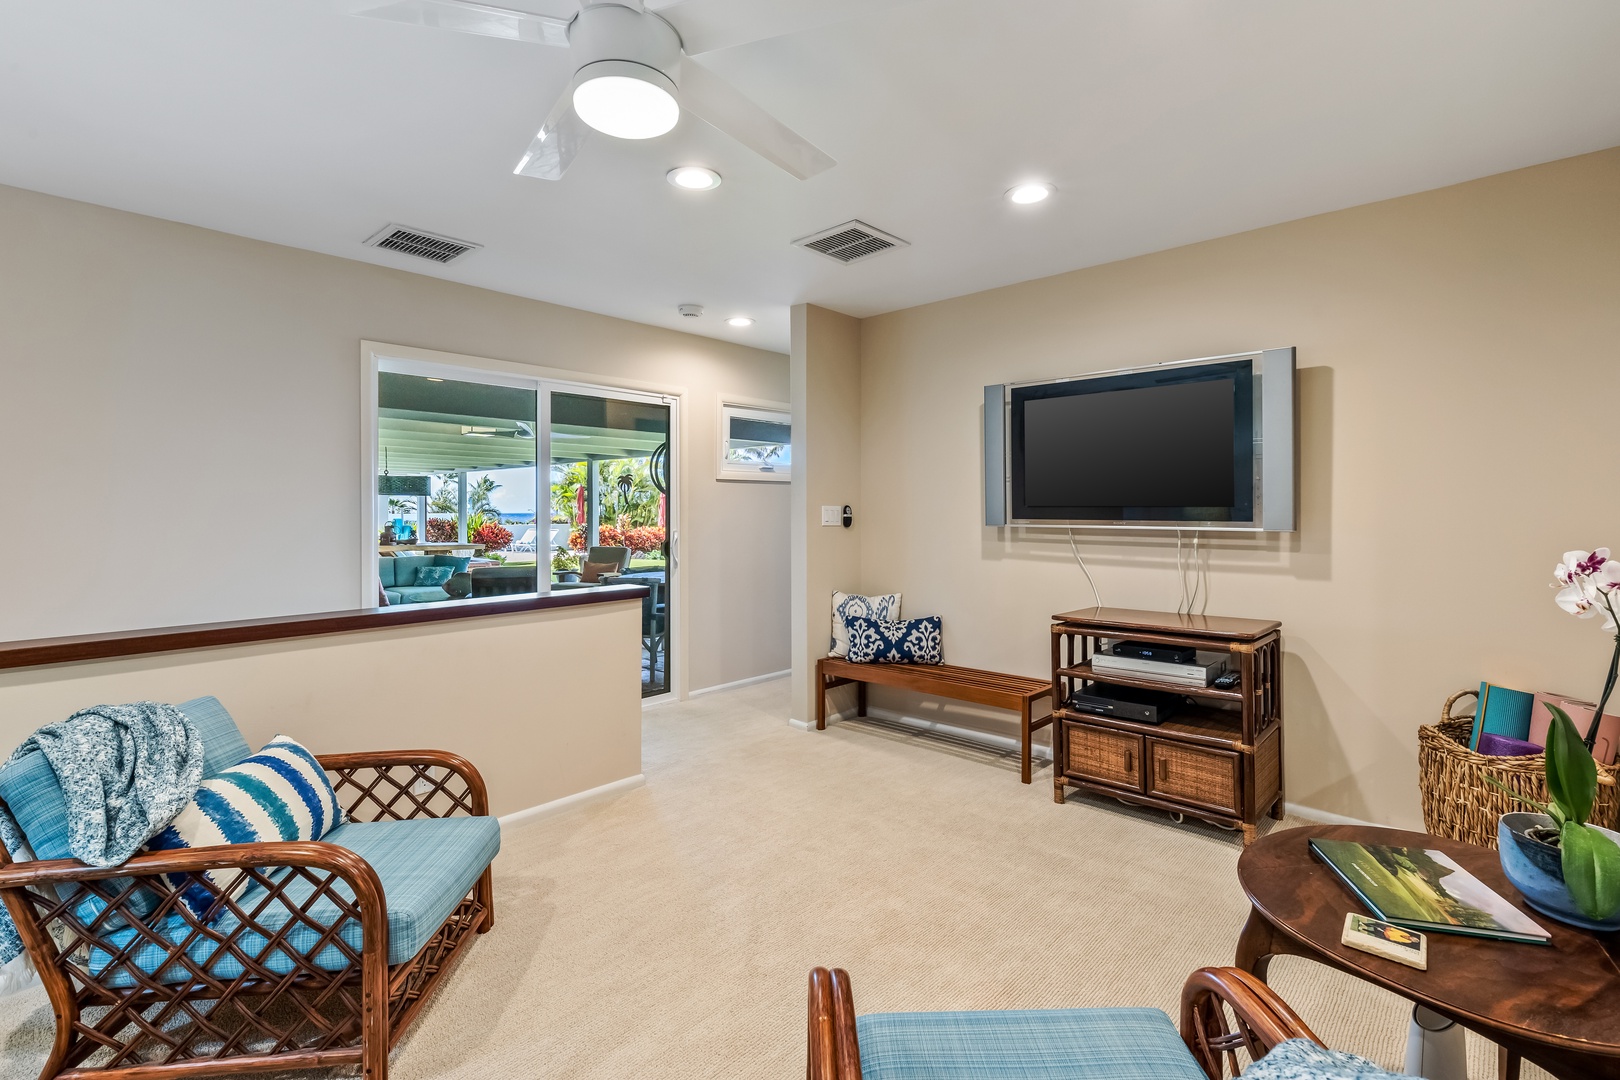 Honolulu Vacation Rentals, Hale Ola - Bonus room with couches and tv and views of the lanai